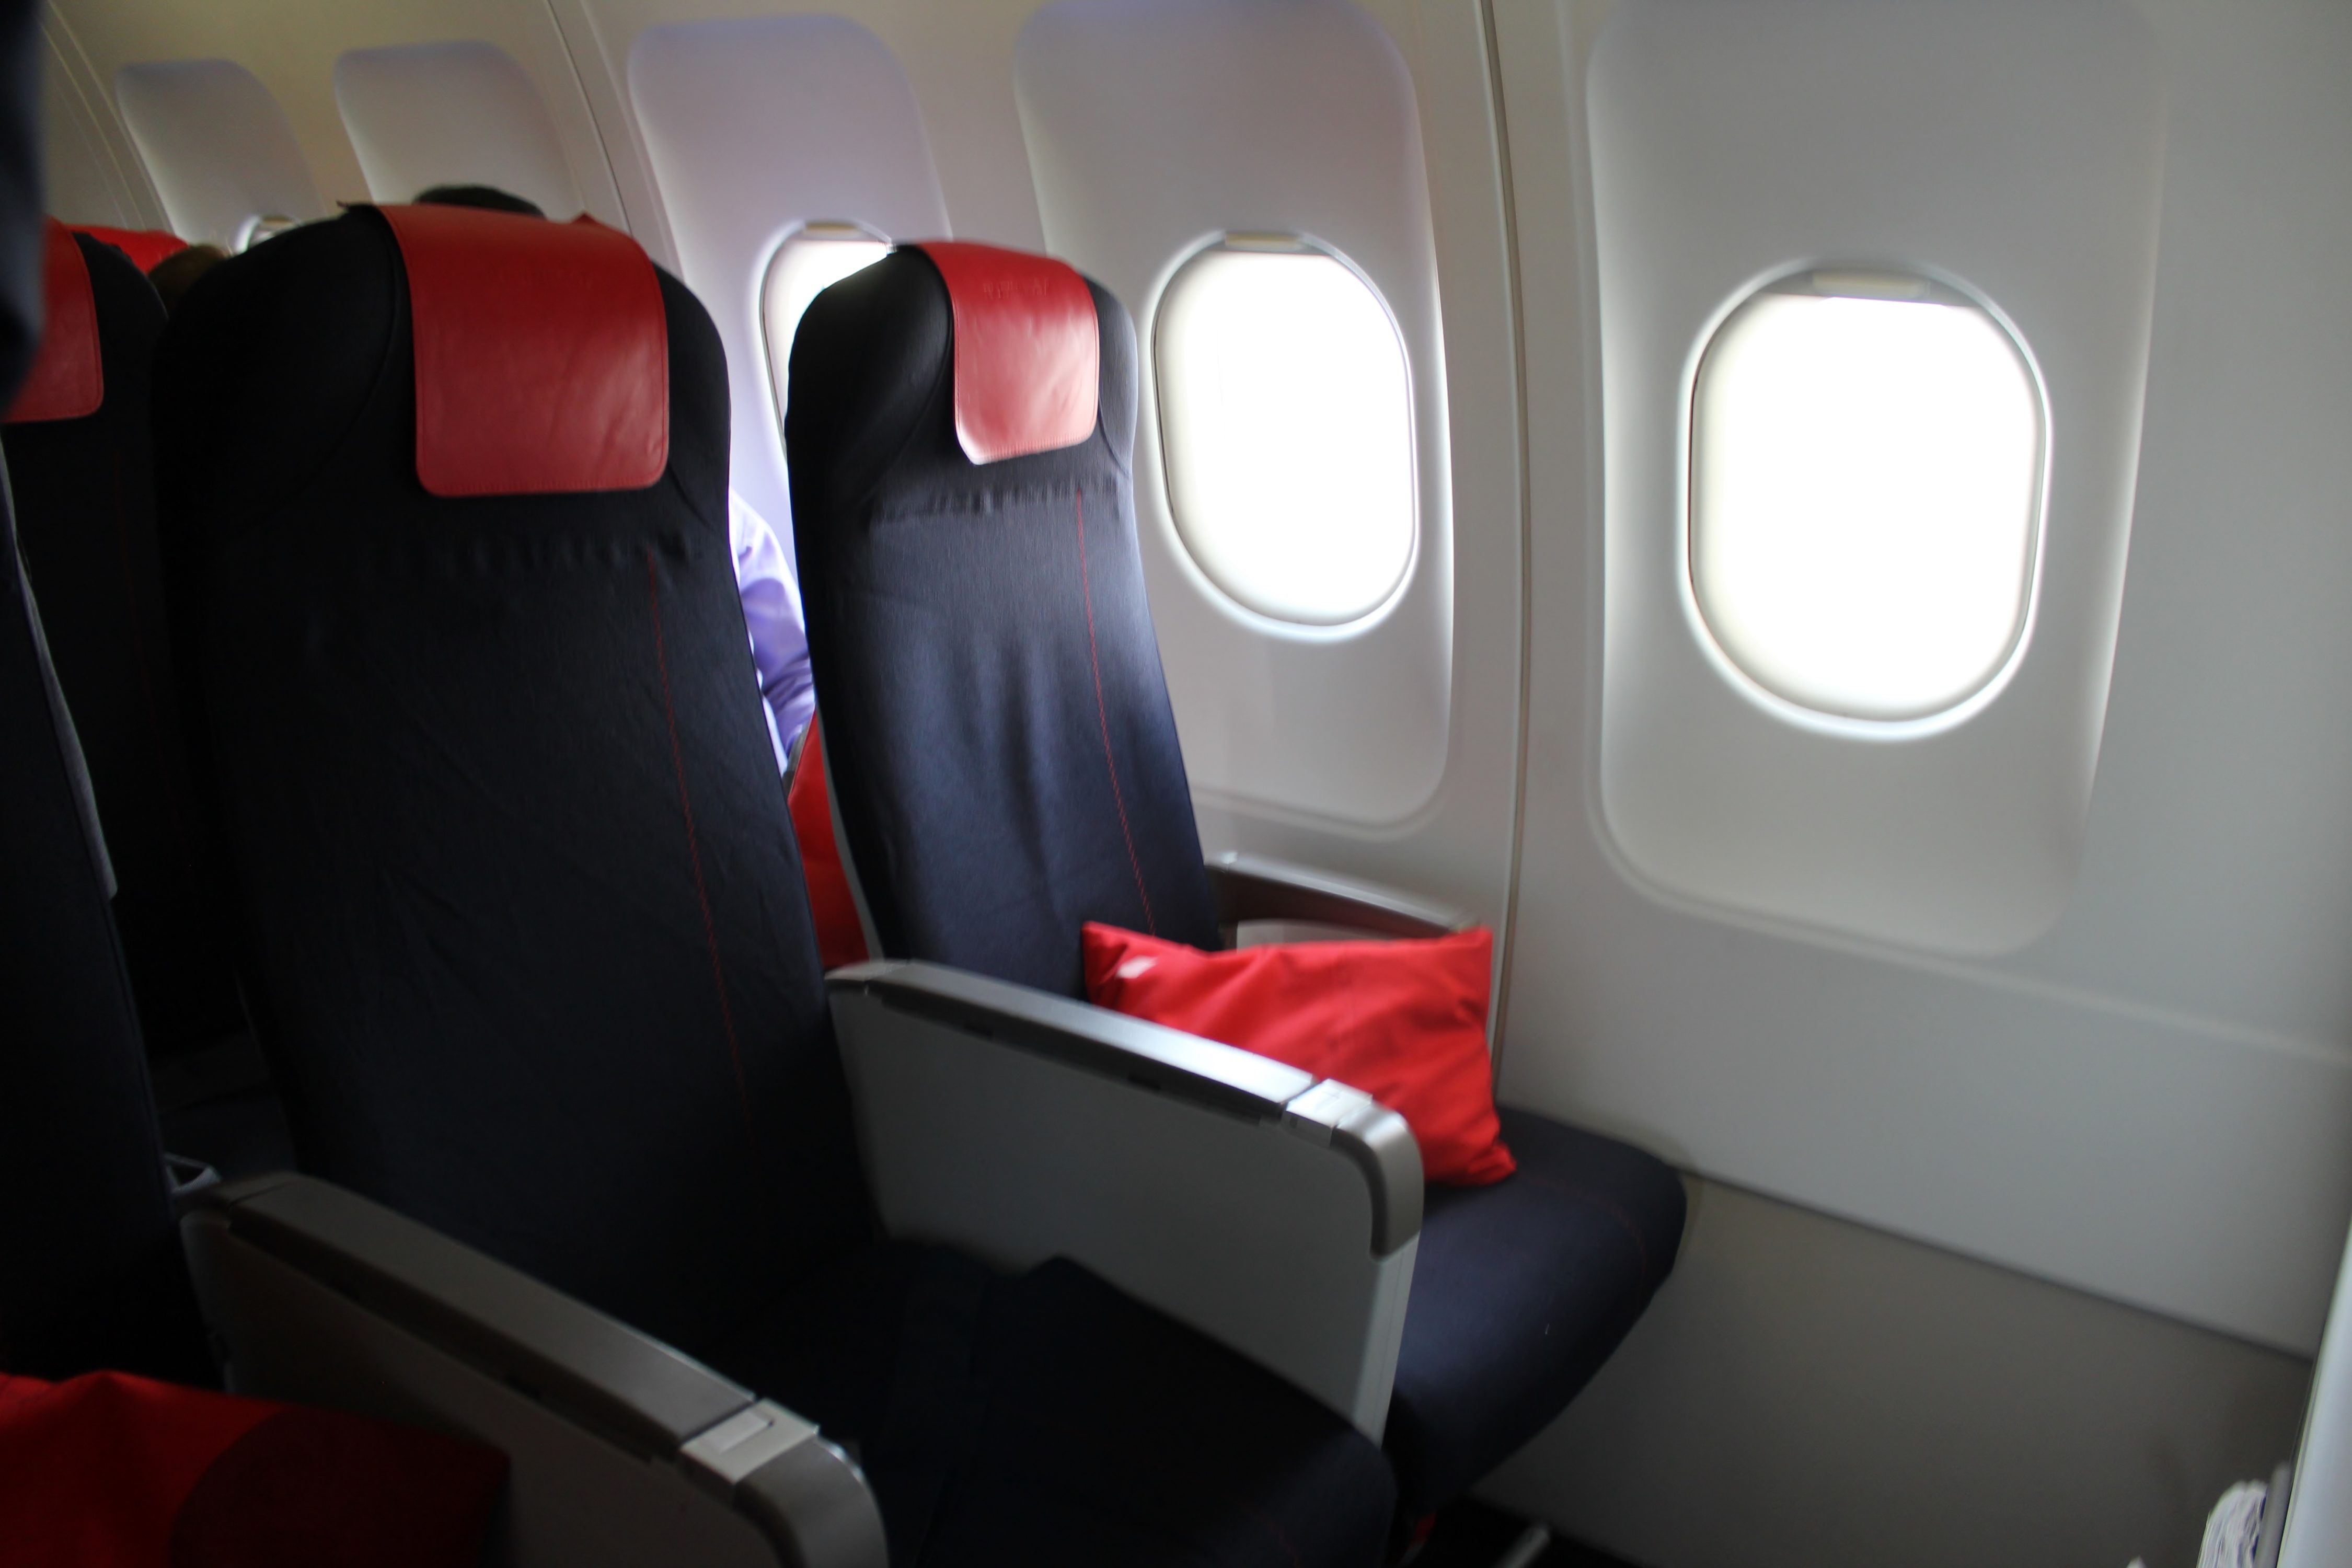 Flight Review: Air France Business Class on the Airbus A350, Paris